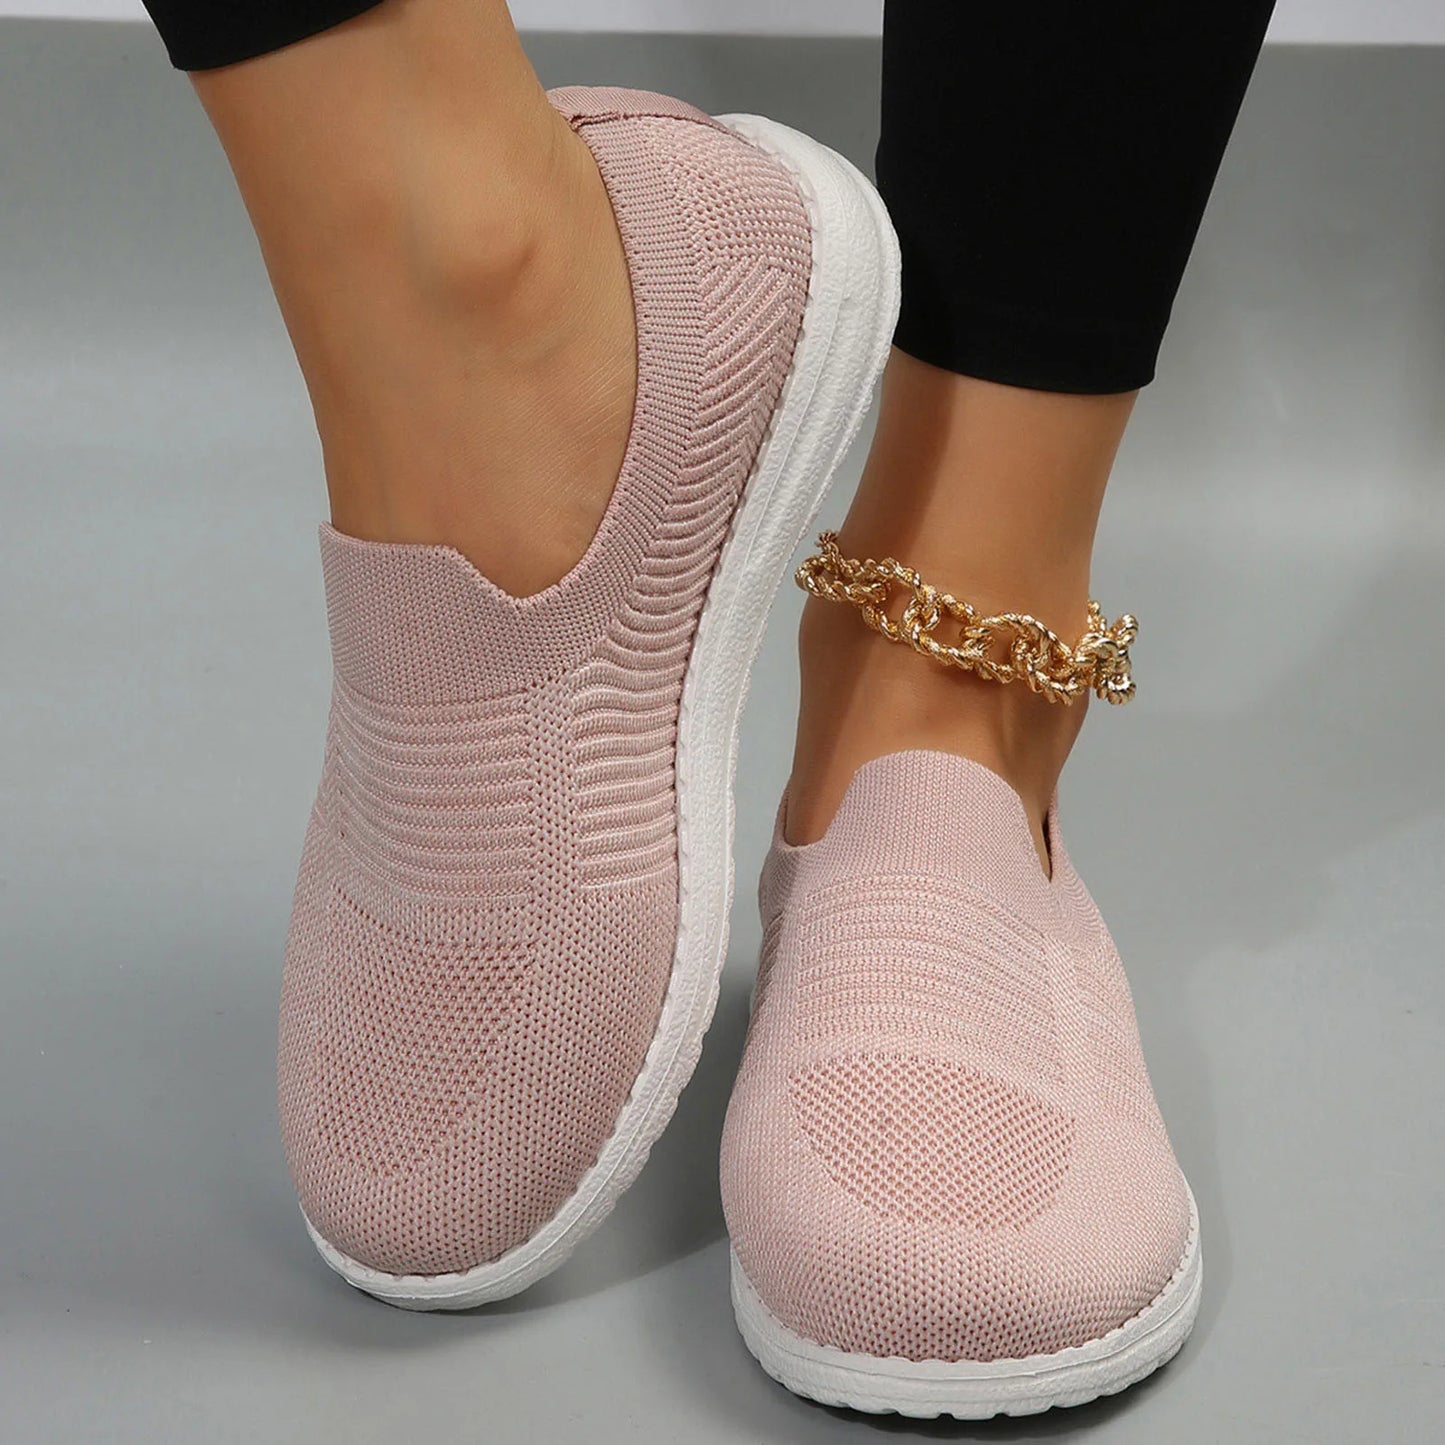 Ladies Slip-On Mesh Shoes Sports Casual Shoes Breathable/Plus Size Lightweight Running Women's Casual Work Sneakers